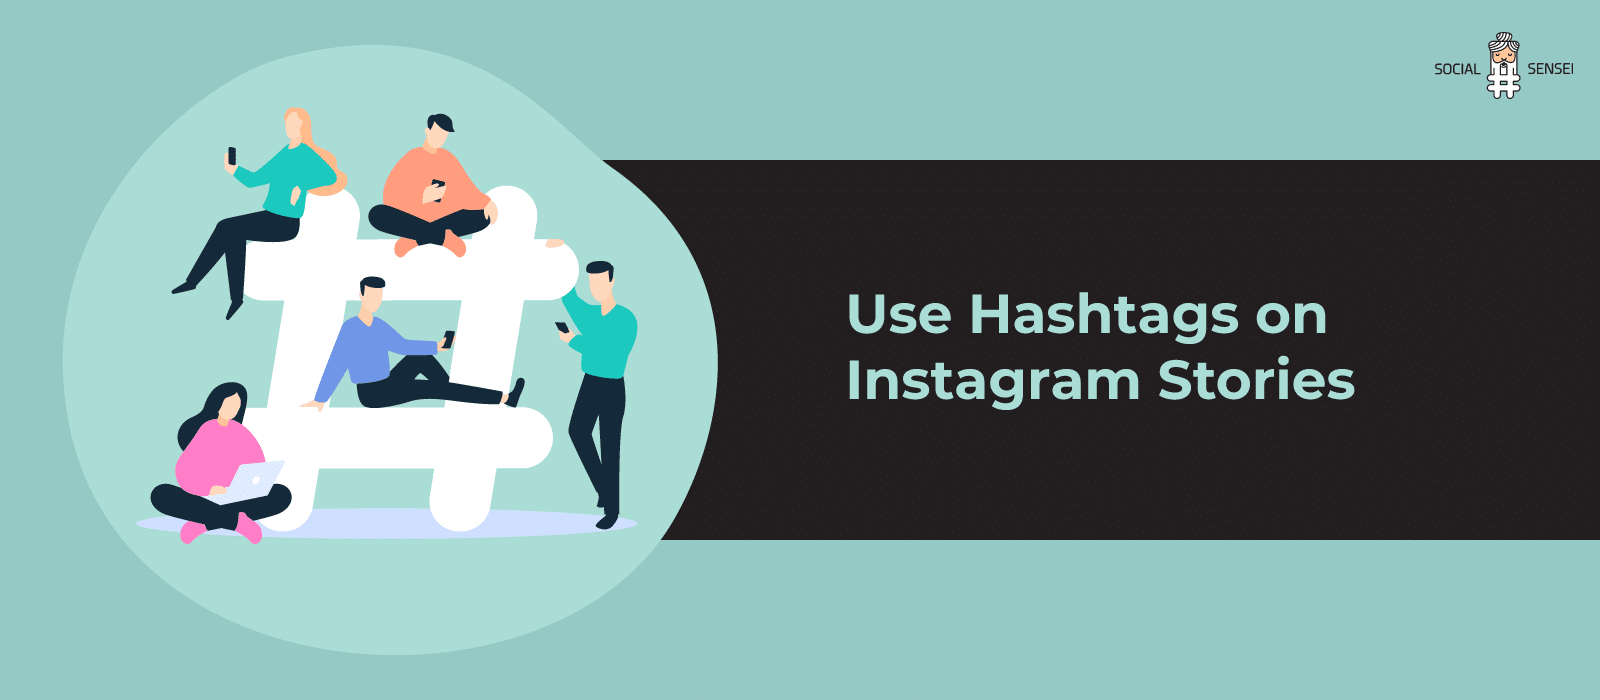 Use Hashtags on Instagram Stories